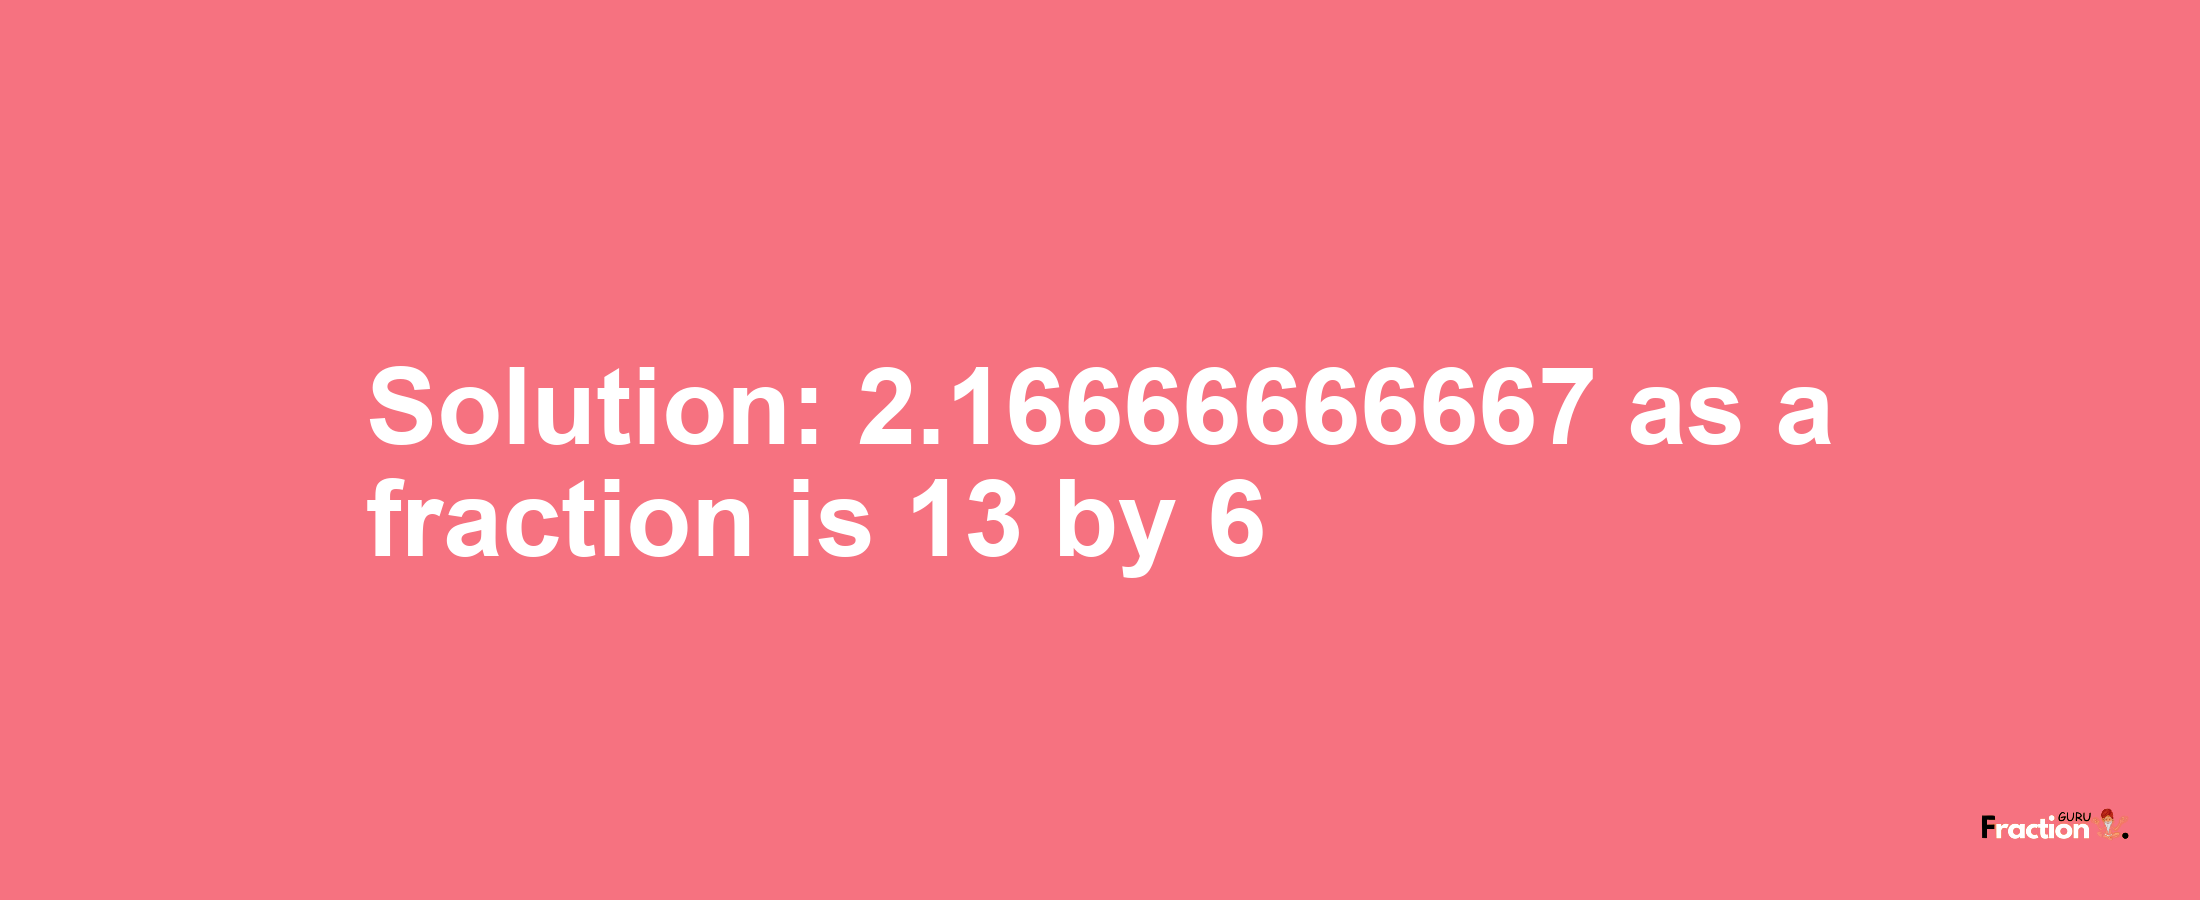 Solution:2.16666666667 as a fraction is 13/6